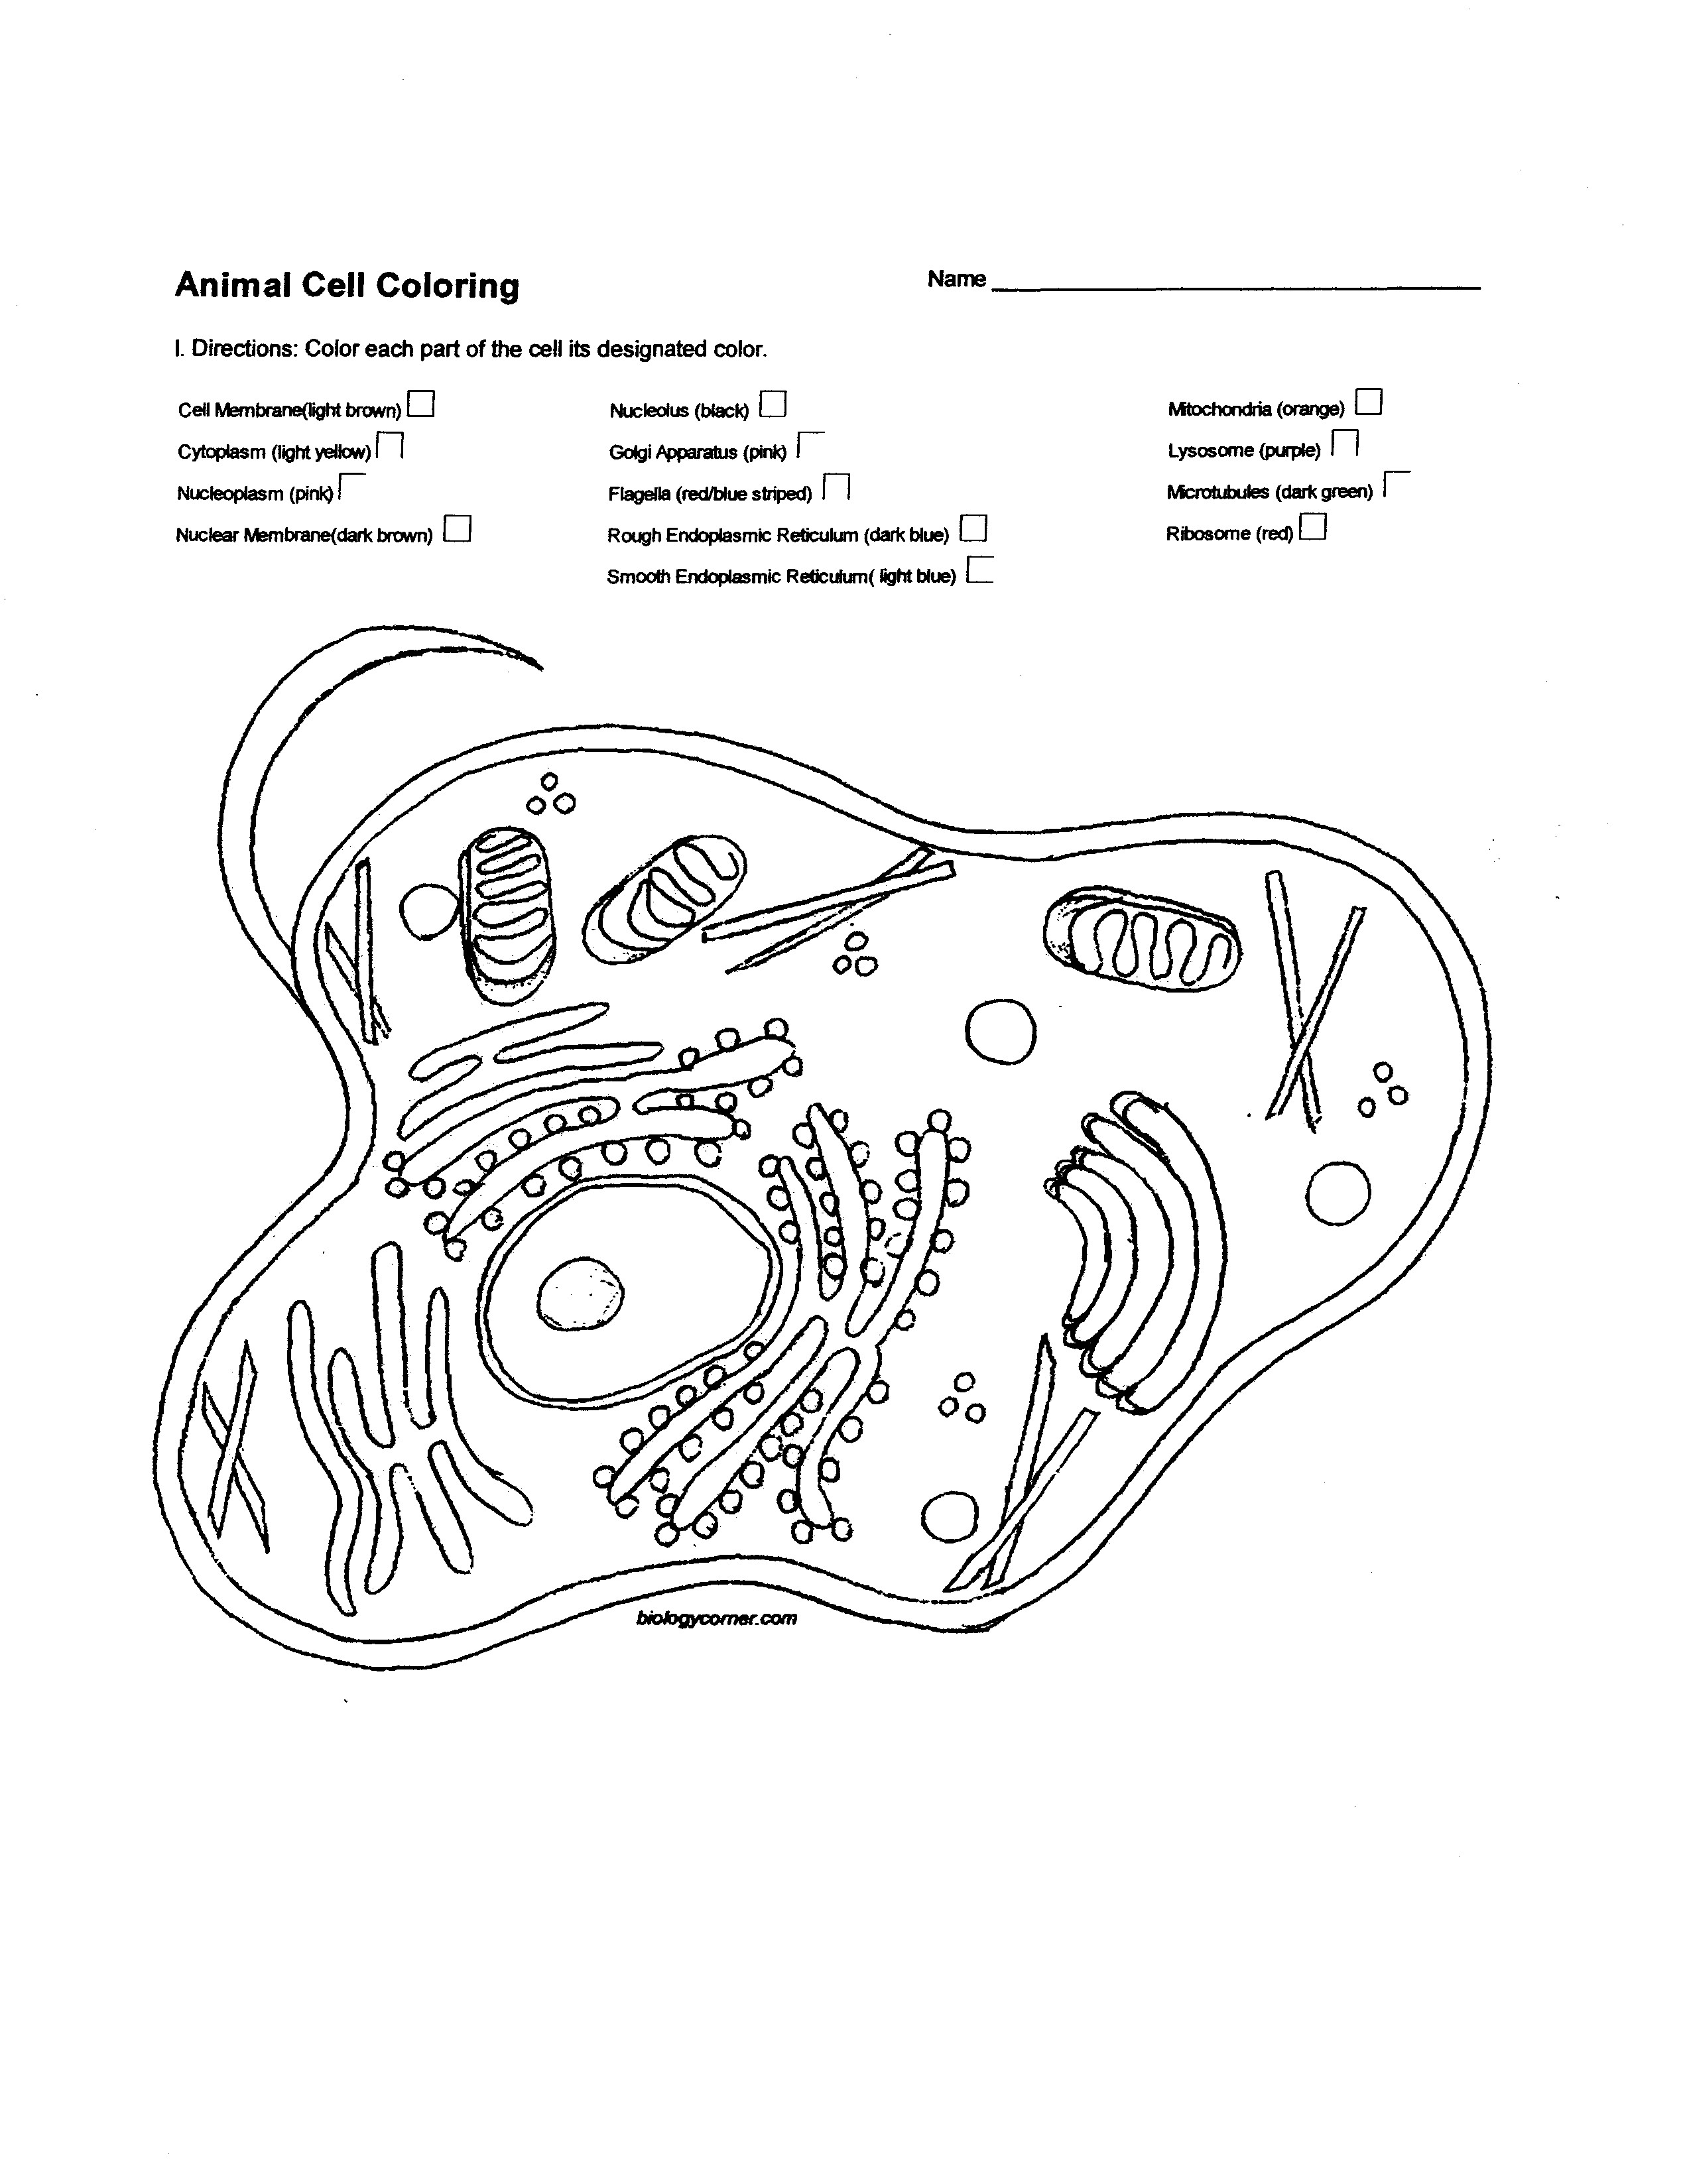 animal cell coloring sheet answers 2538x3294 diagram plant cell diagram animal simple drawing